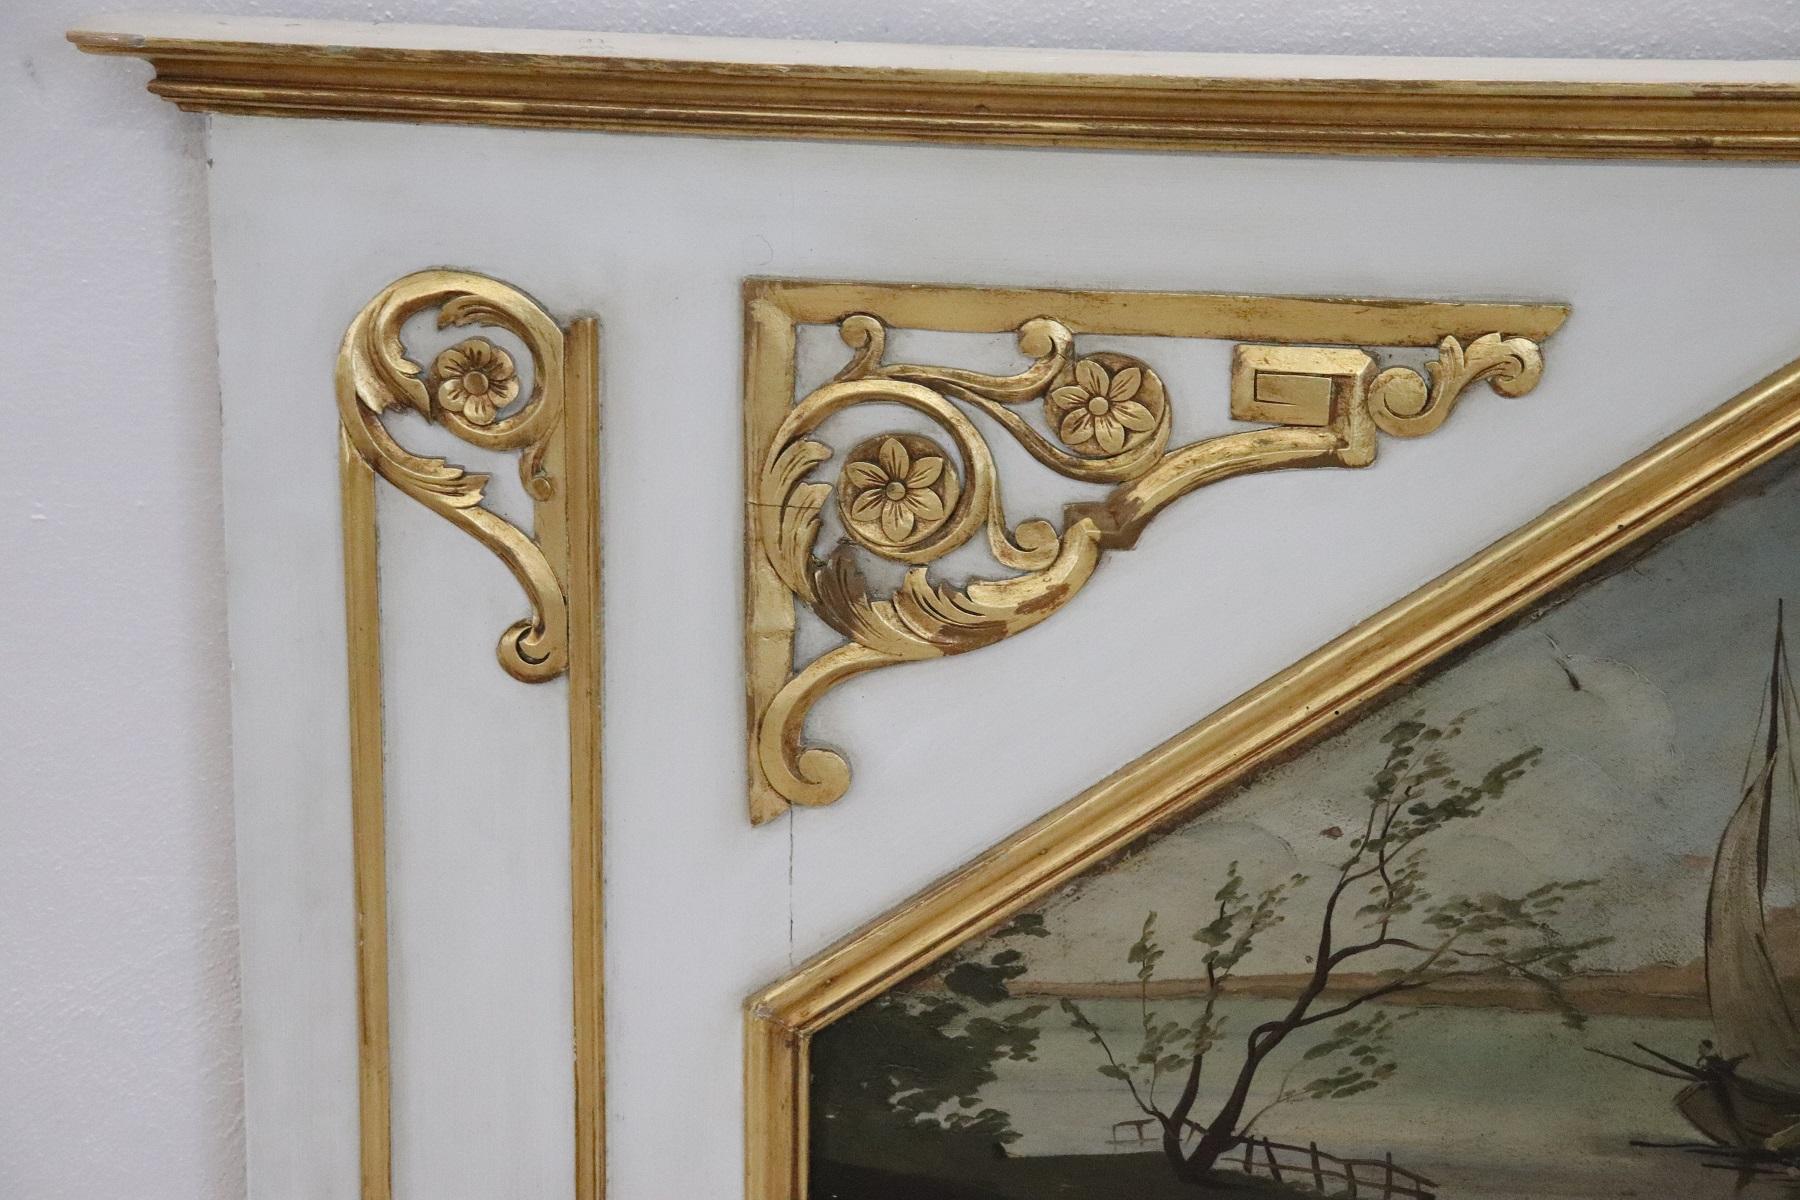 Beautiful elegant large fireplace mirror in perfect Louis XVI style, 1950s wood lacquered finely and richly carved with swirls of great refinement decorated in gold leaf. Above the mirror a beautiful oil painting on marine cardboard with ancient